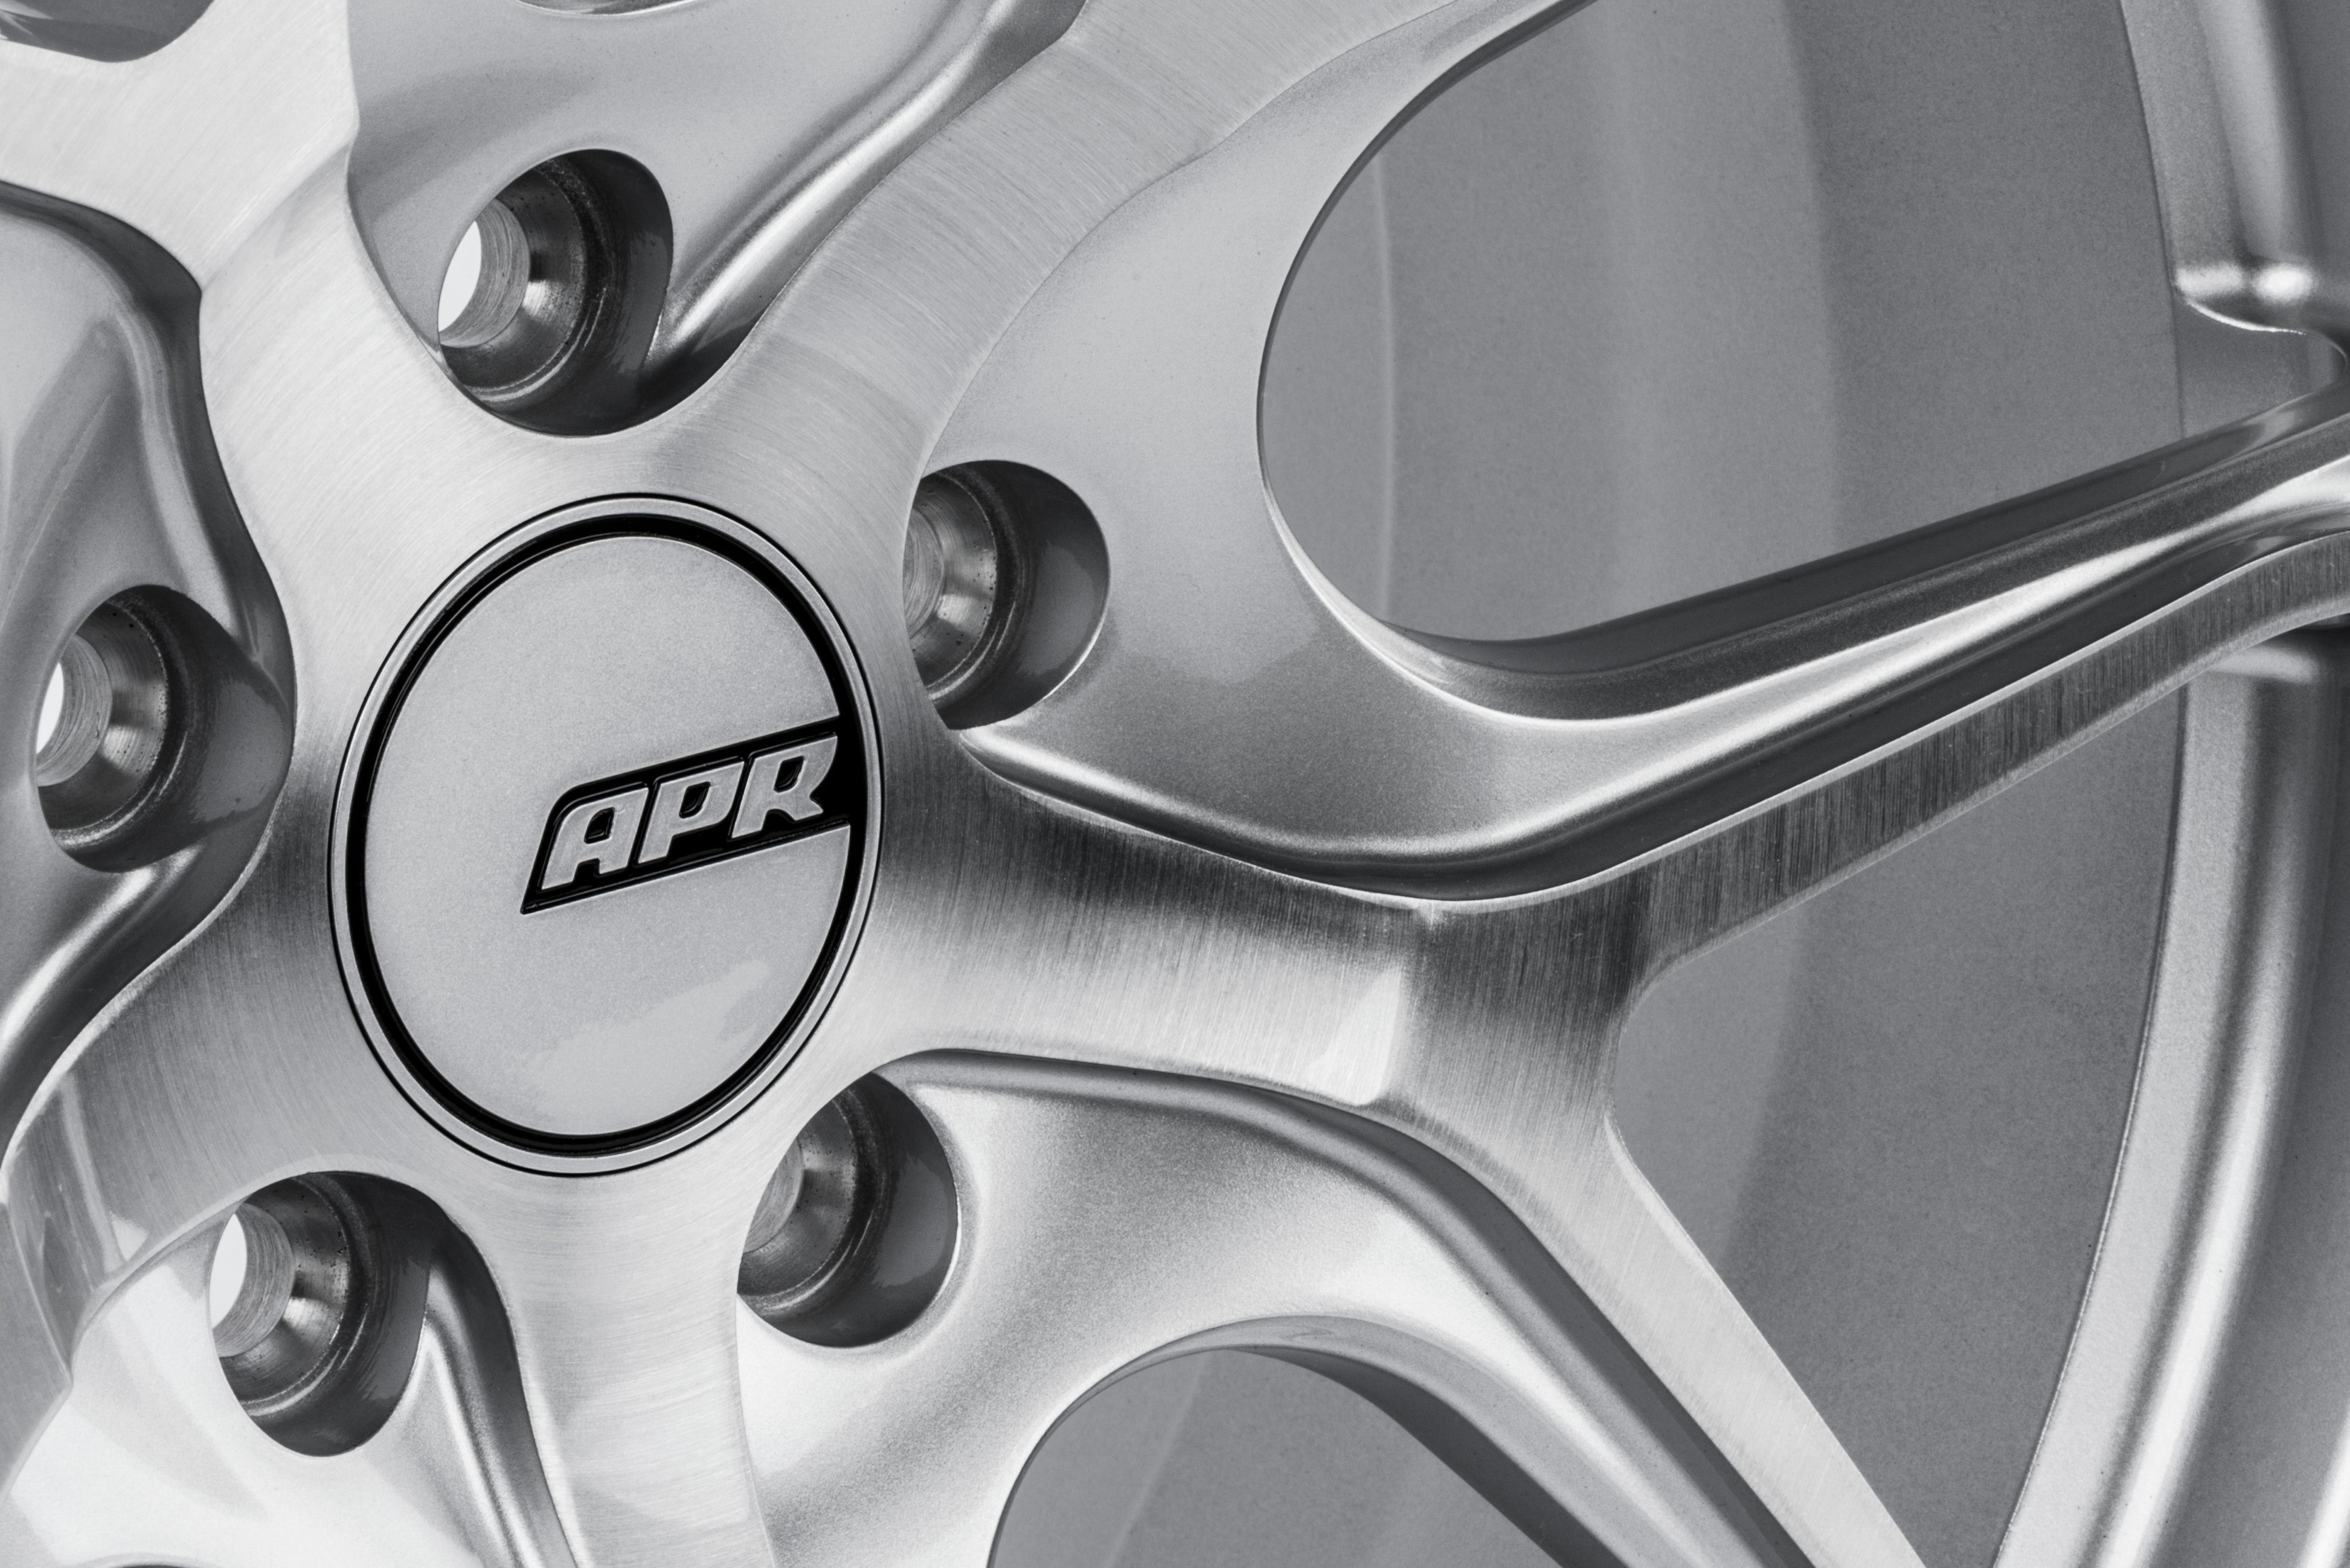 APR S01 FORGED WHEELS (19X8.5) (SILVER/MACHINED) (1 WHEEL)